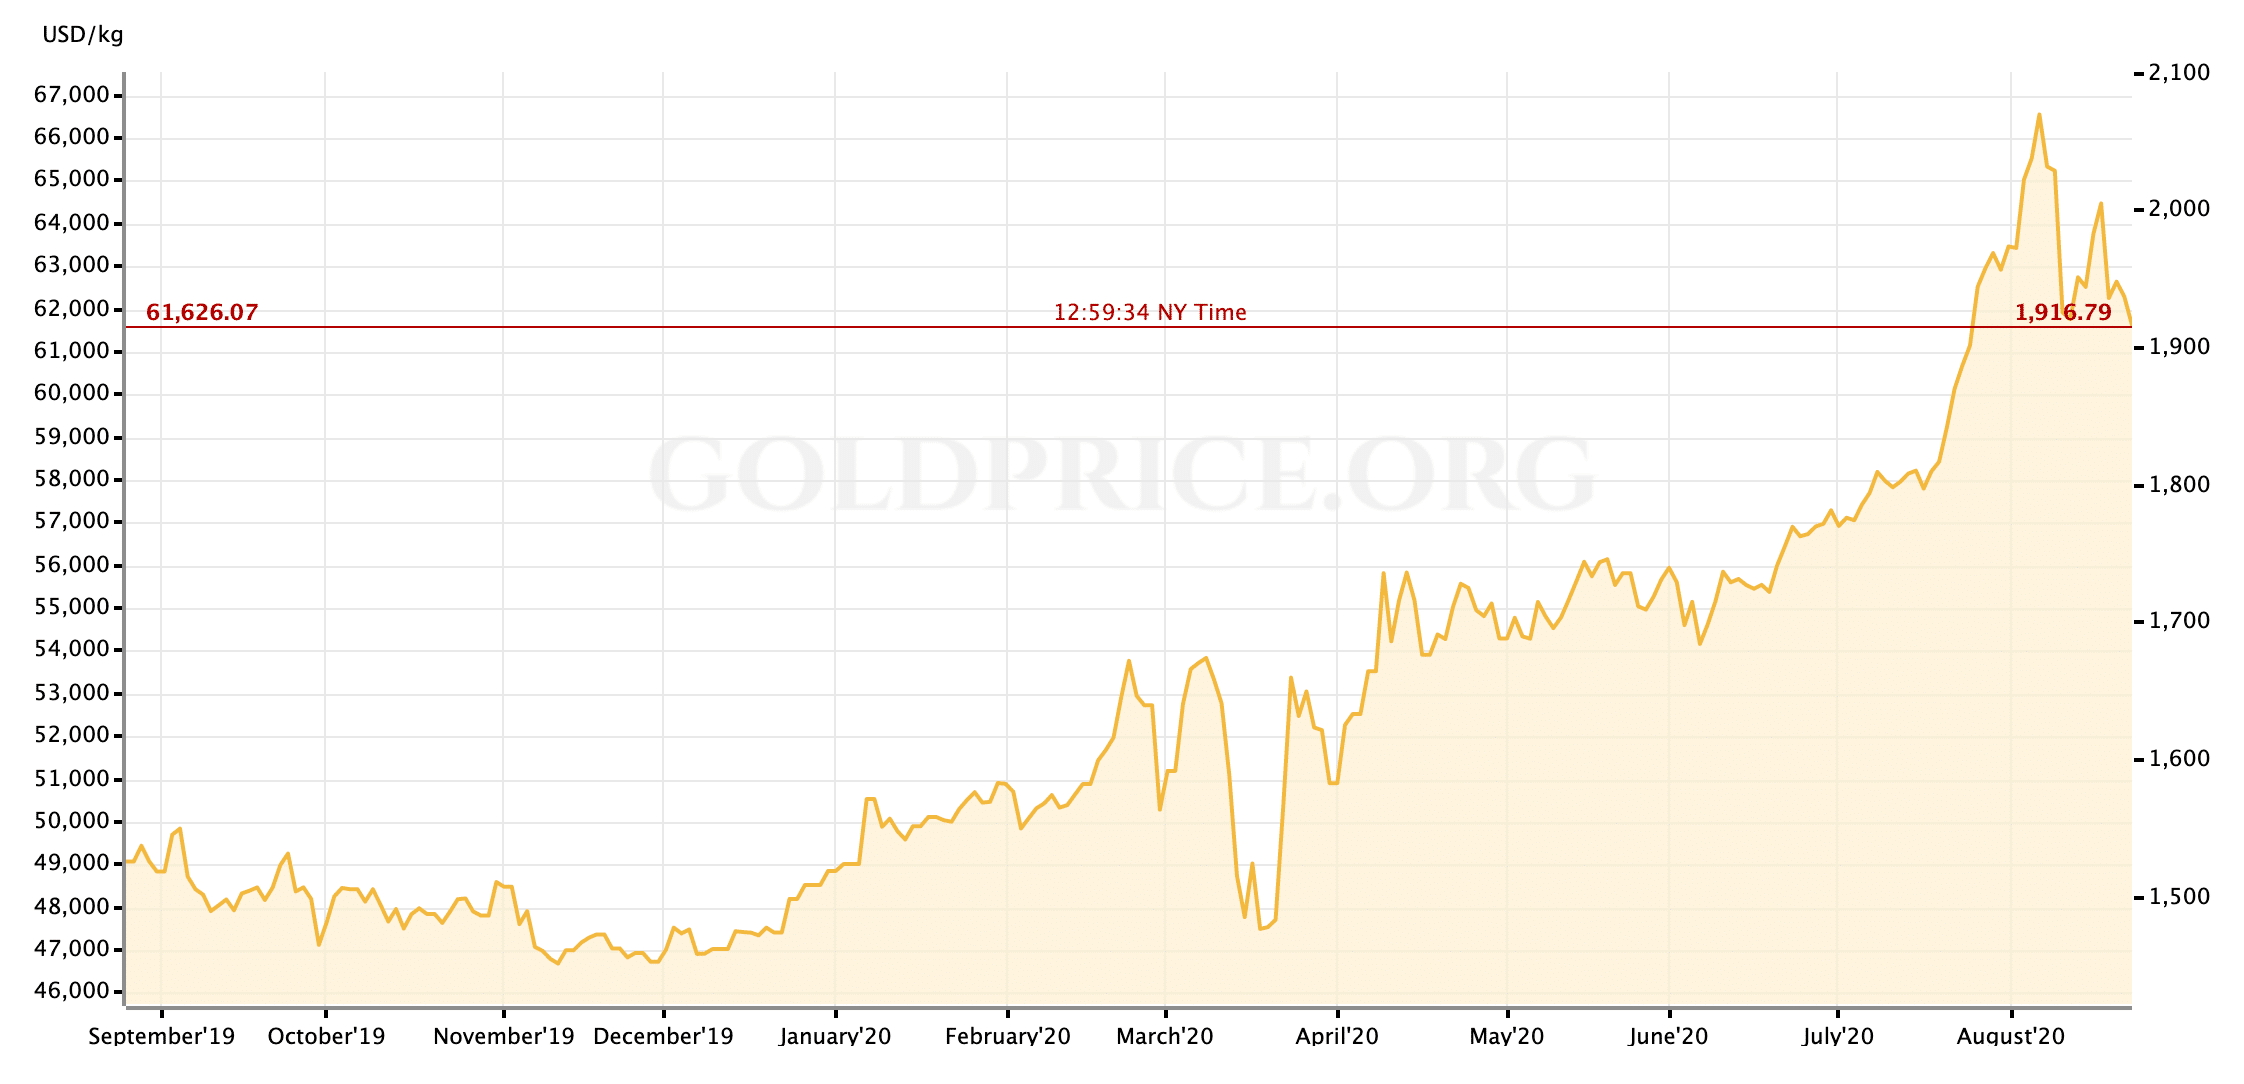 1 year chart of the price of gold